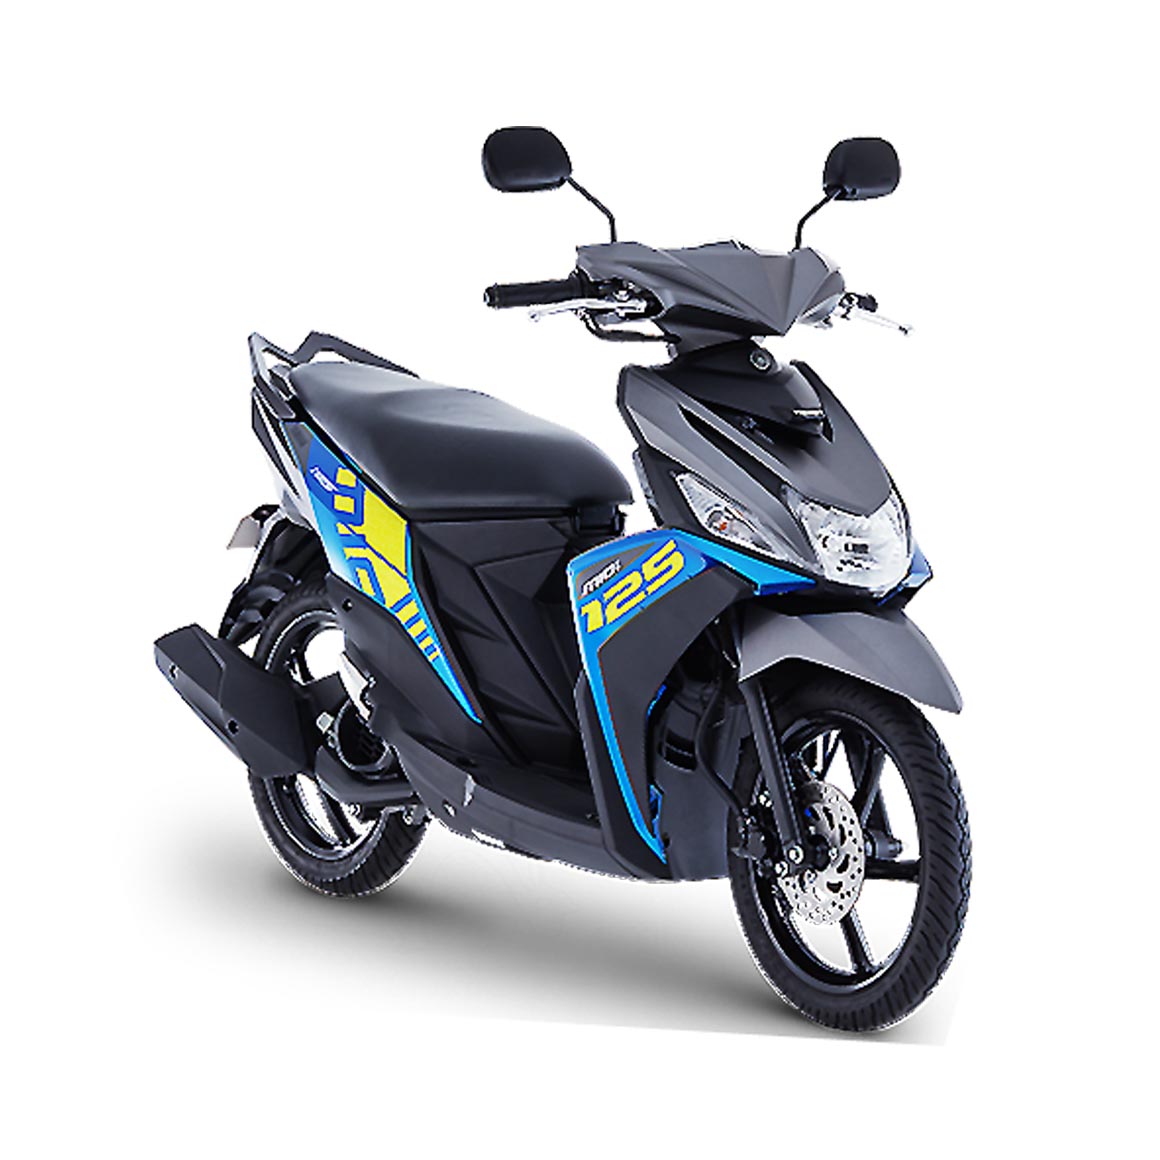 Yamaha Mio i125 I Rent a Scooter Motorcycle in